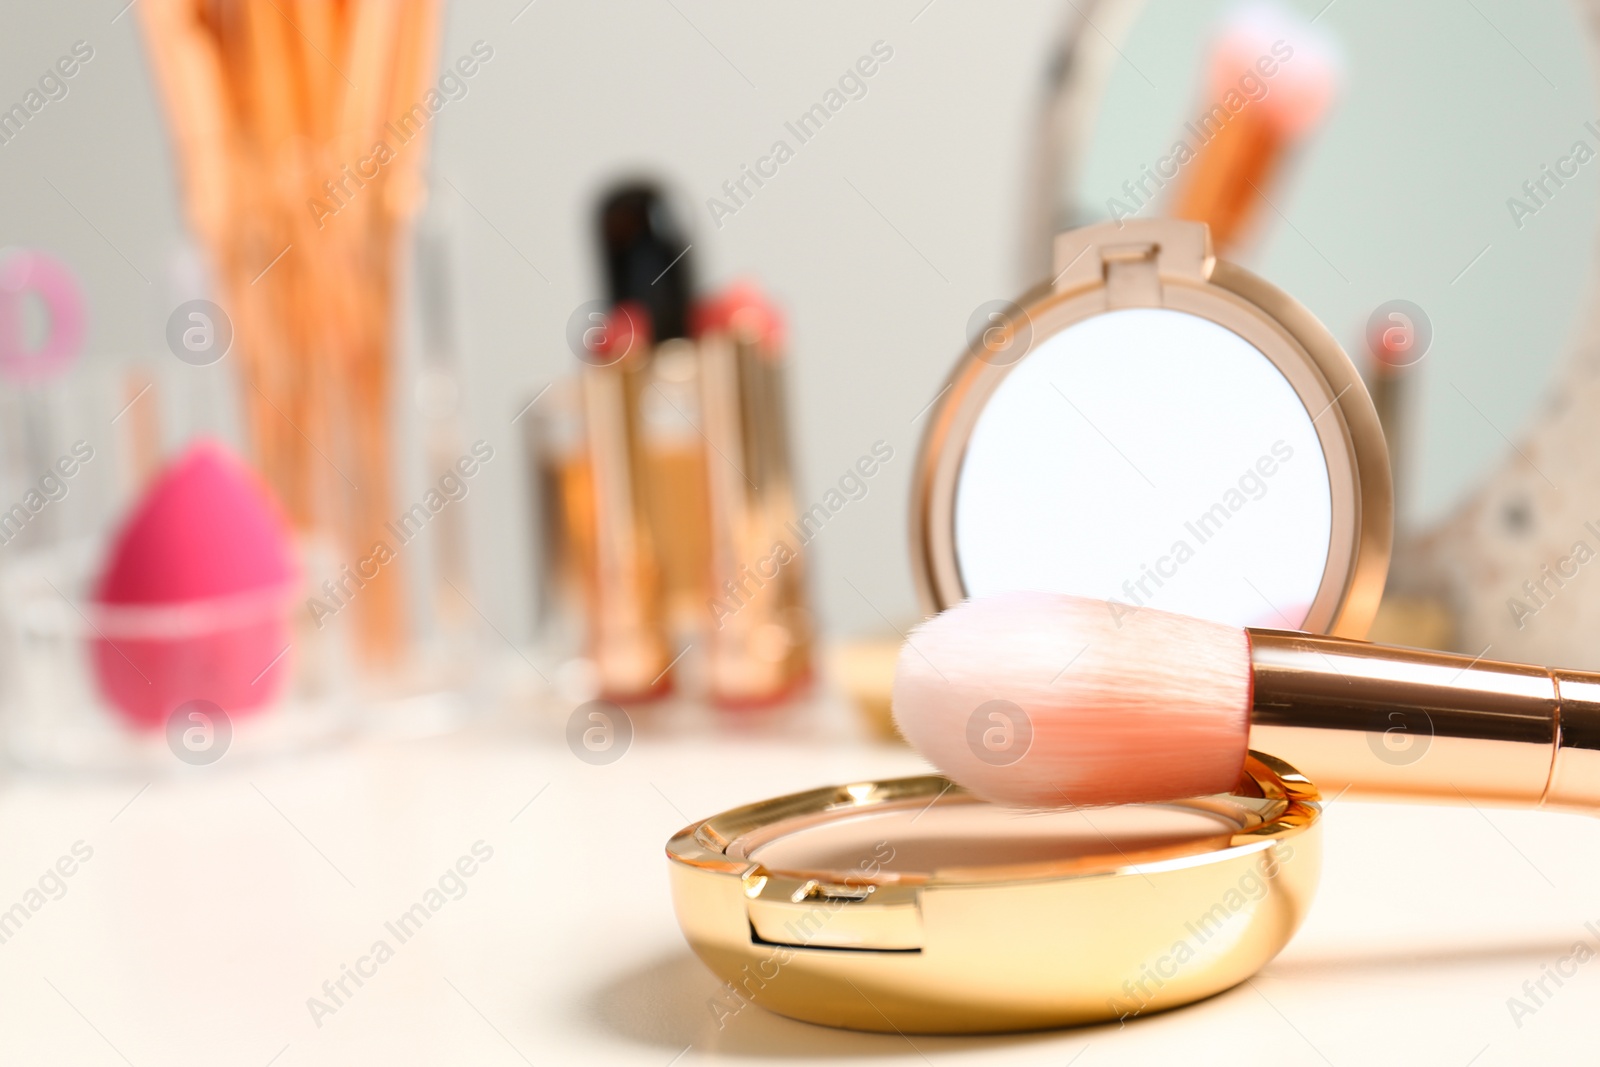 Photo of Compact powder and makeup brush on dressing table. Space for text